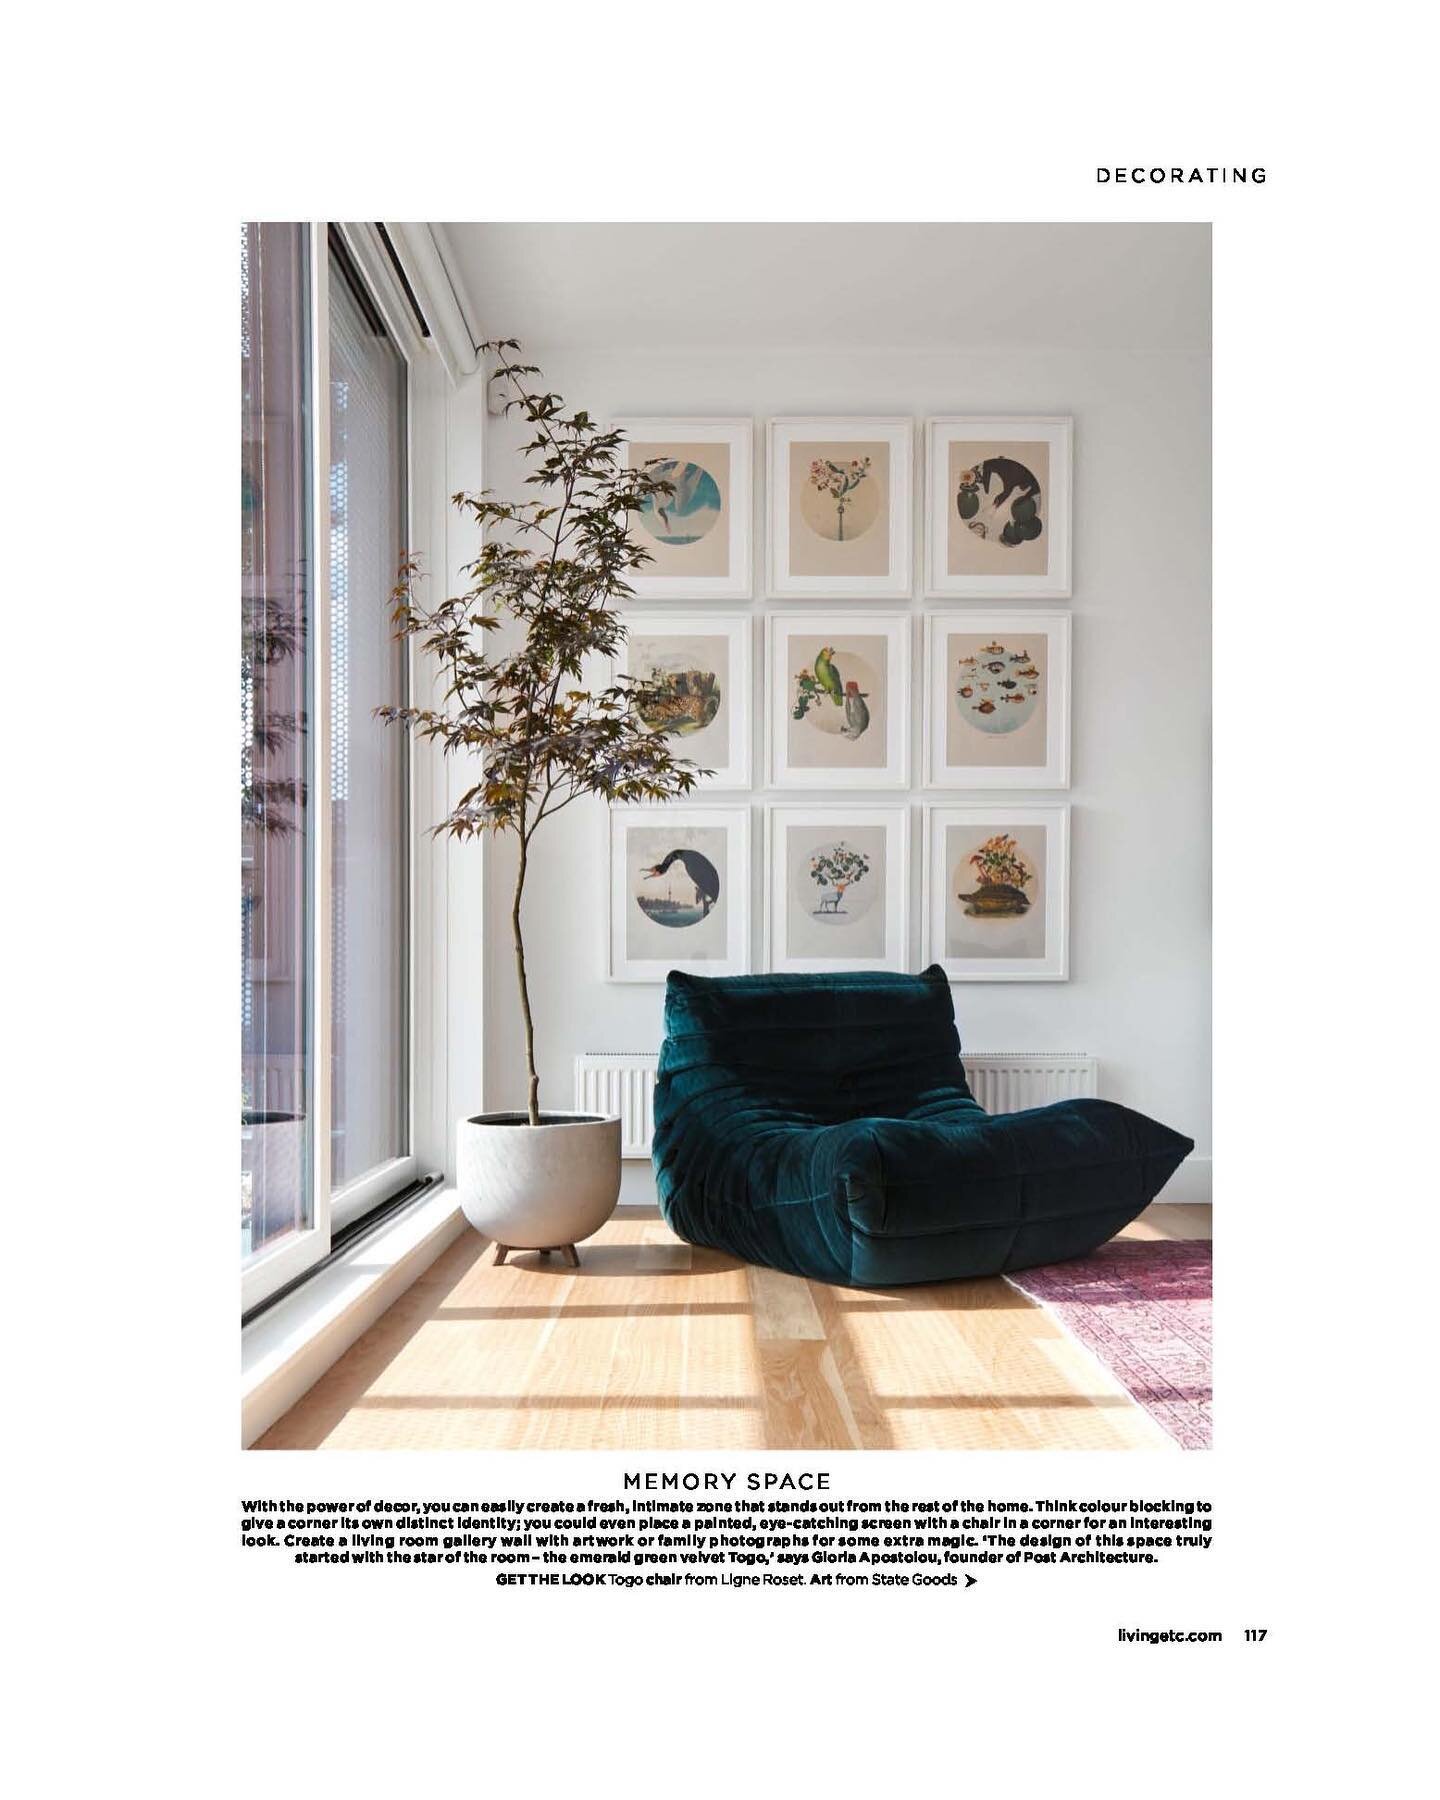 Nice to see one of our projects in the latest Living Etc issue, in an article featuring unused corners of the home that can be transformed into beautiful spaces.